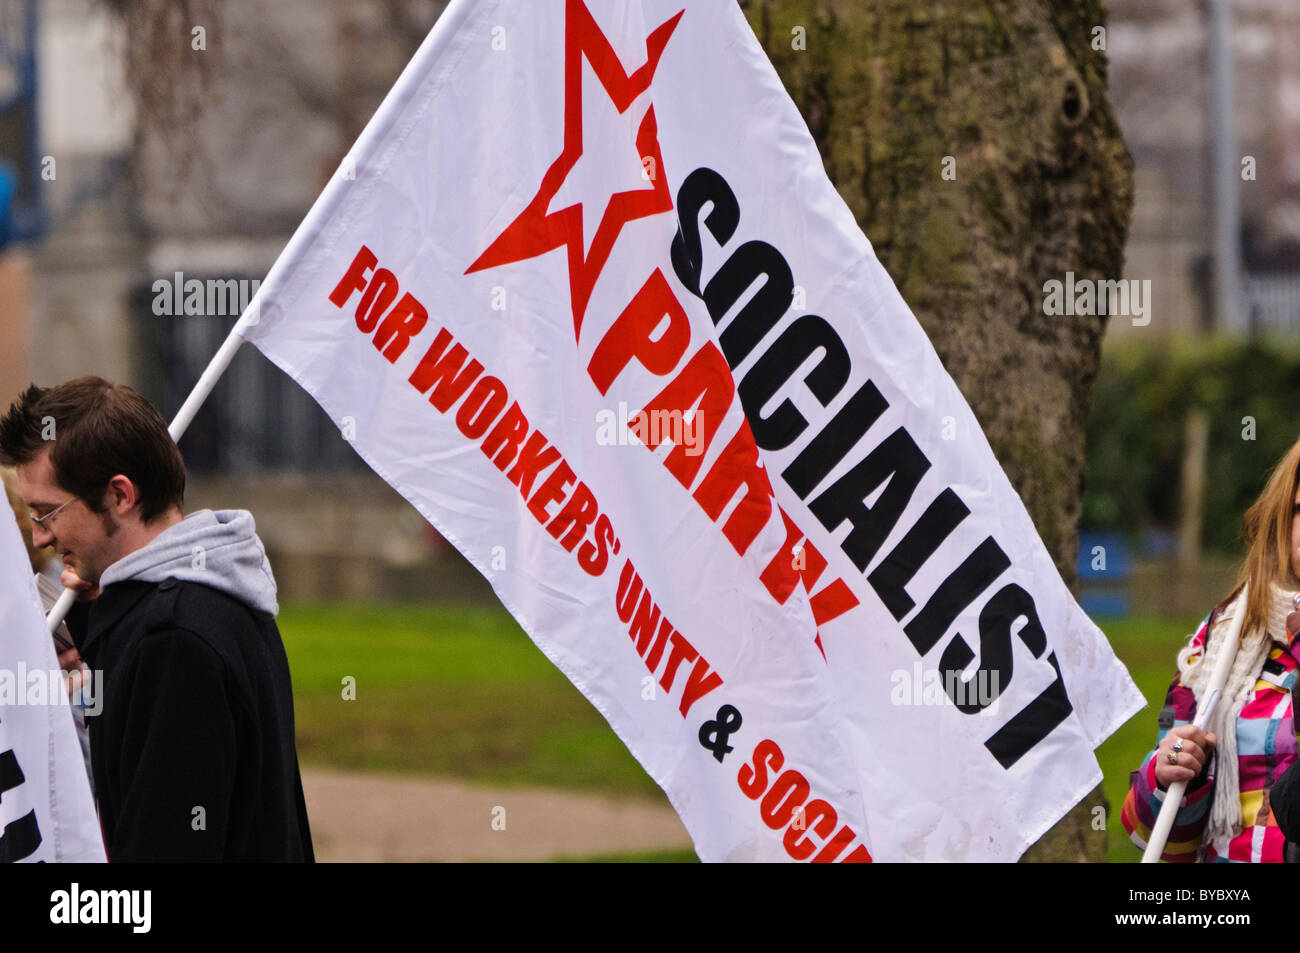 man carries a Socialist Party flag Stock Photo